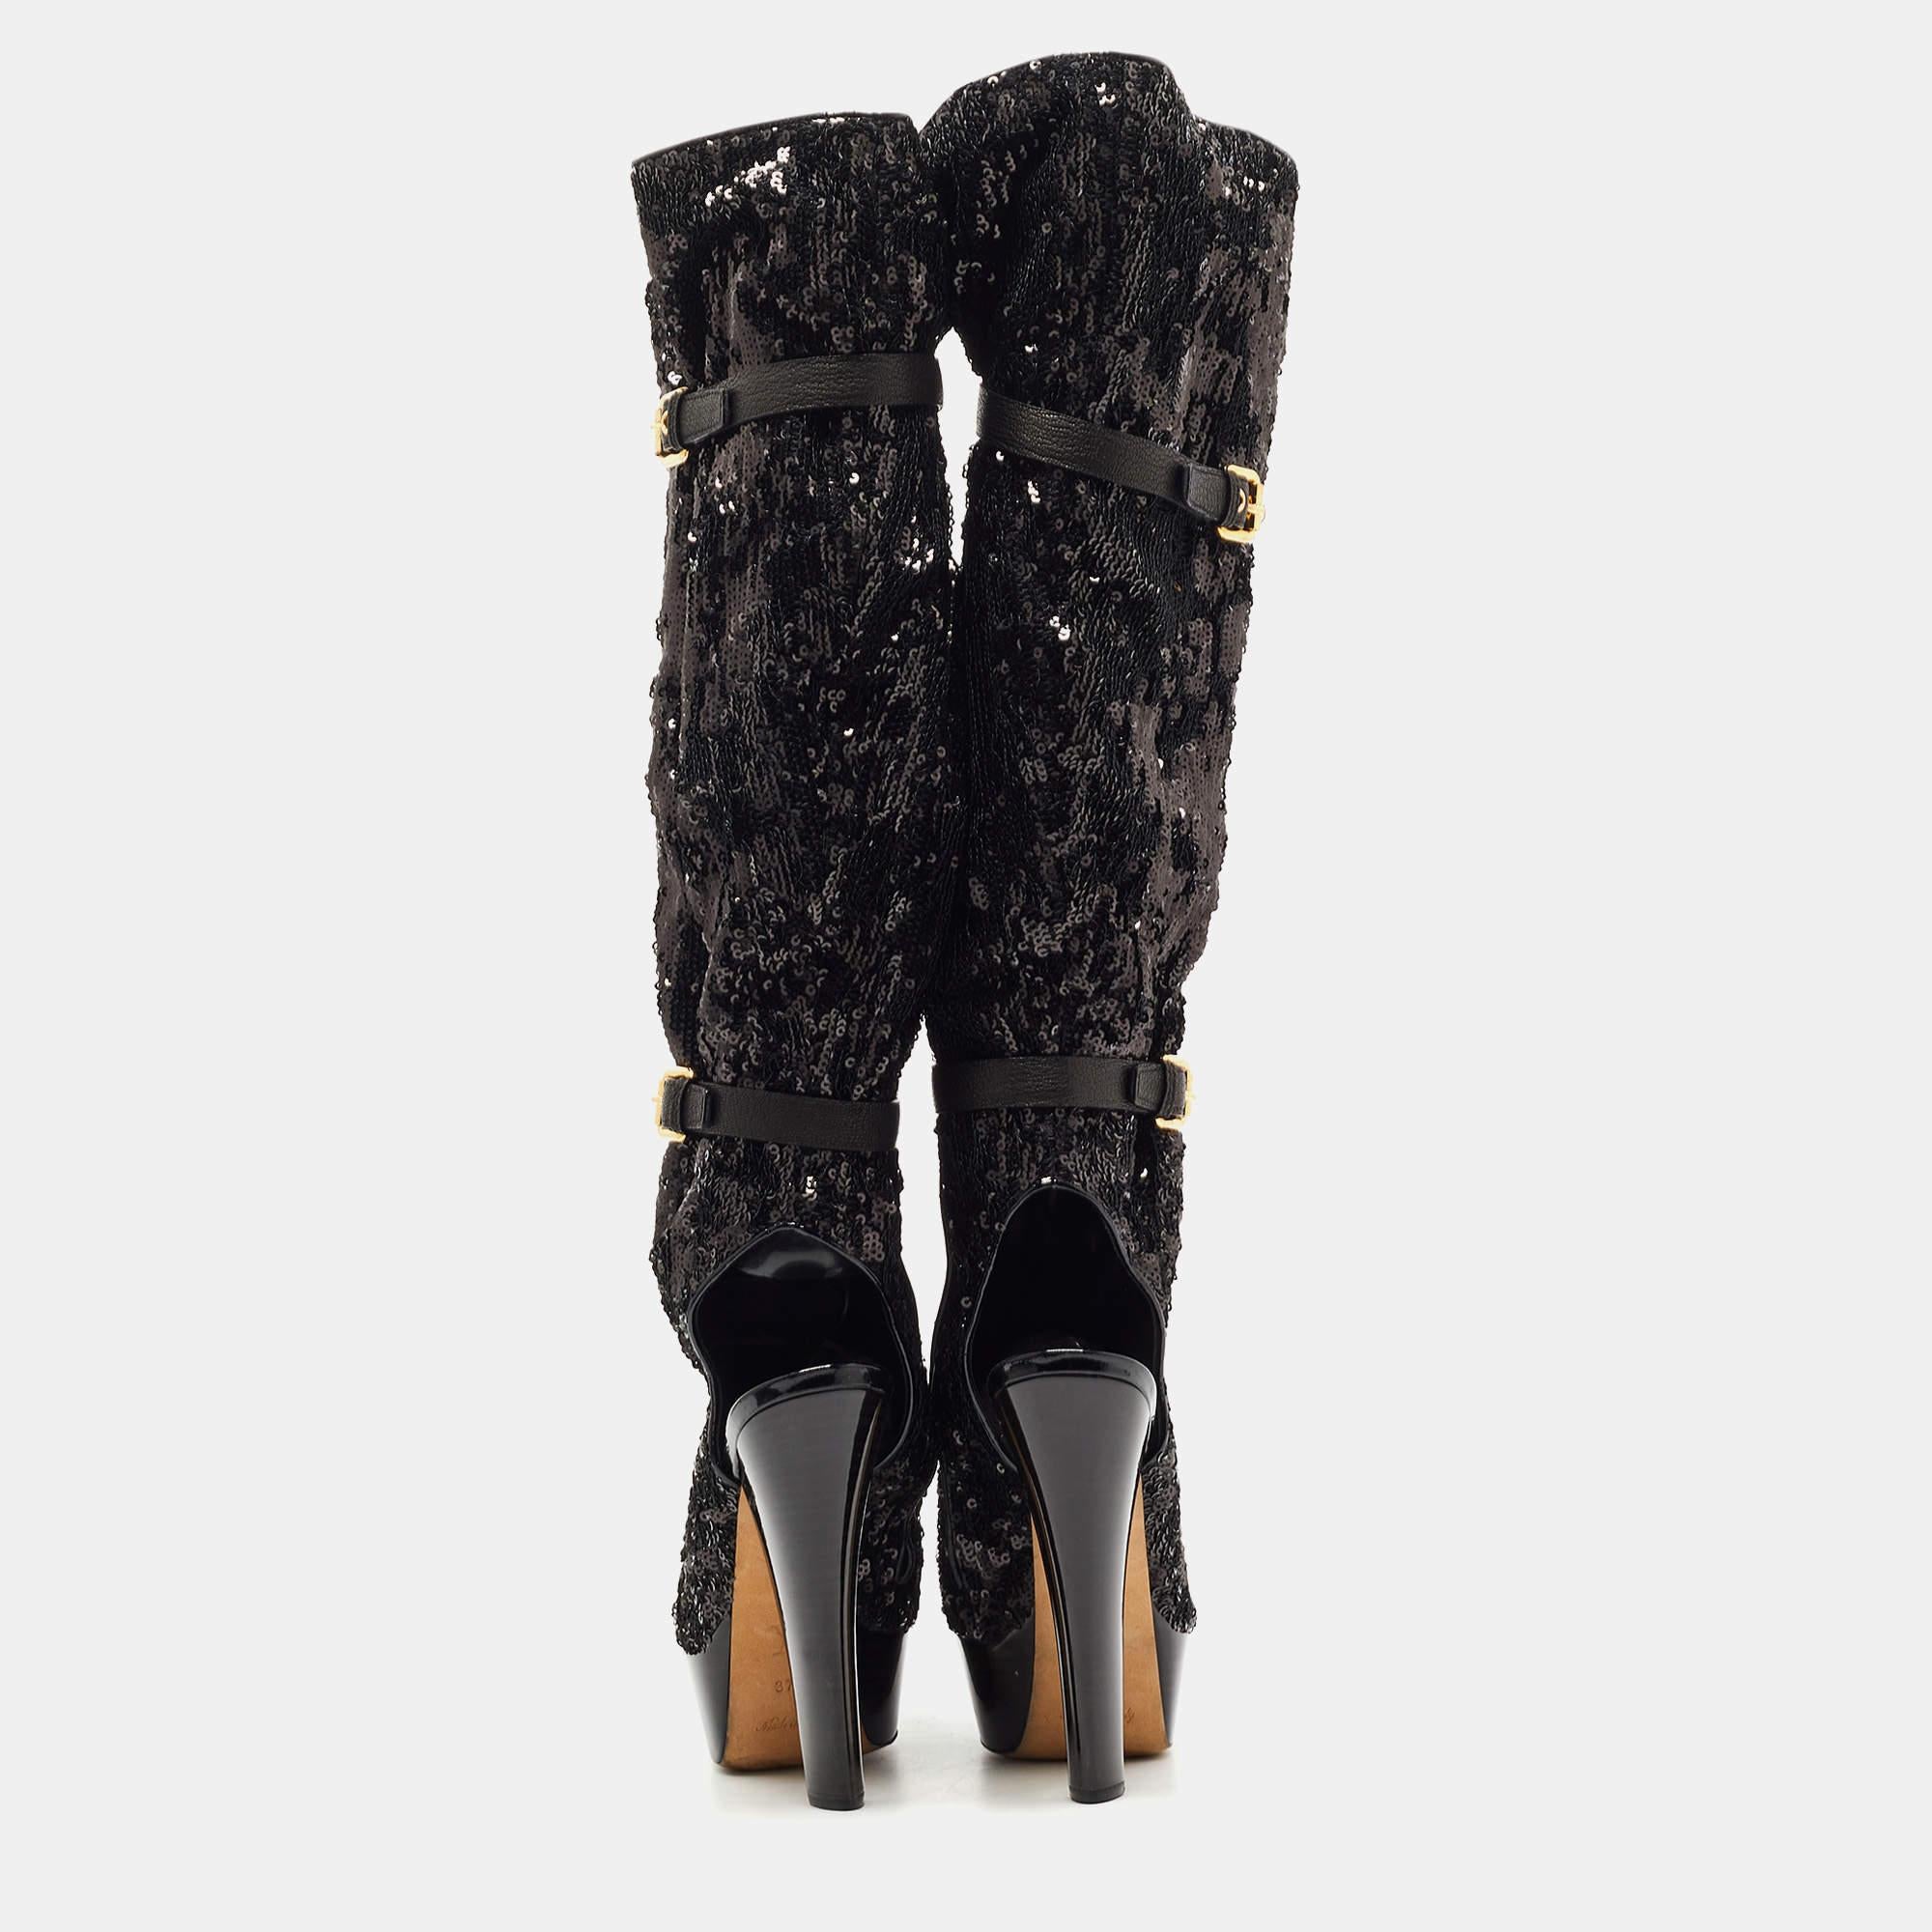 Nail a confident look with these designer boots from Louis Vuitton! They're covered in sequins and added with peep toes, platforms, and 14 cm heels.

